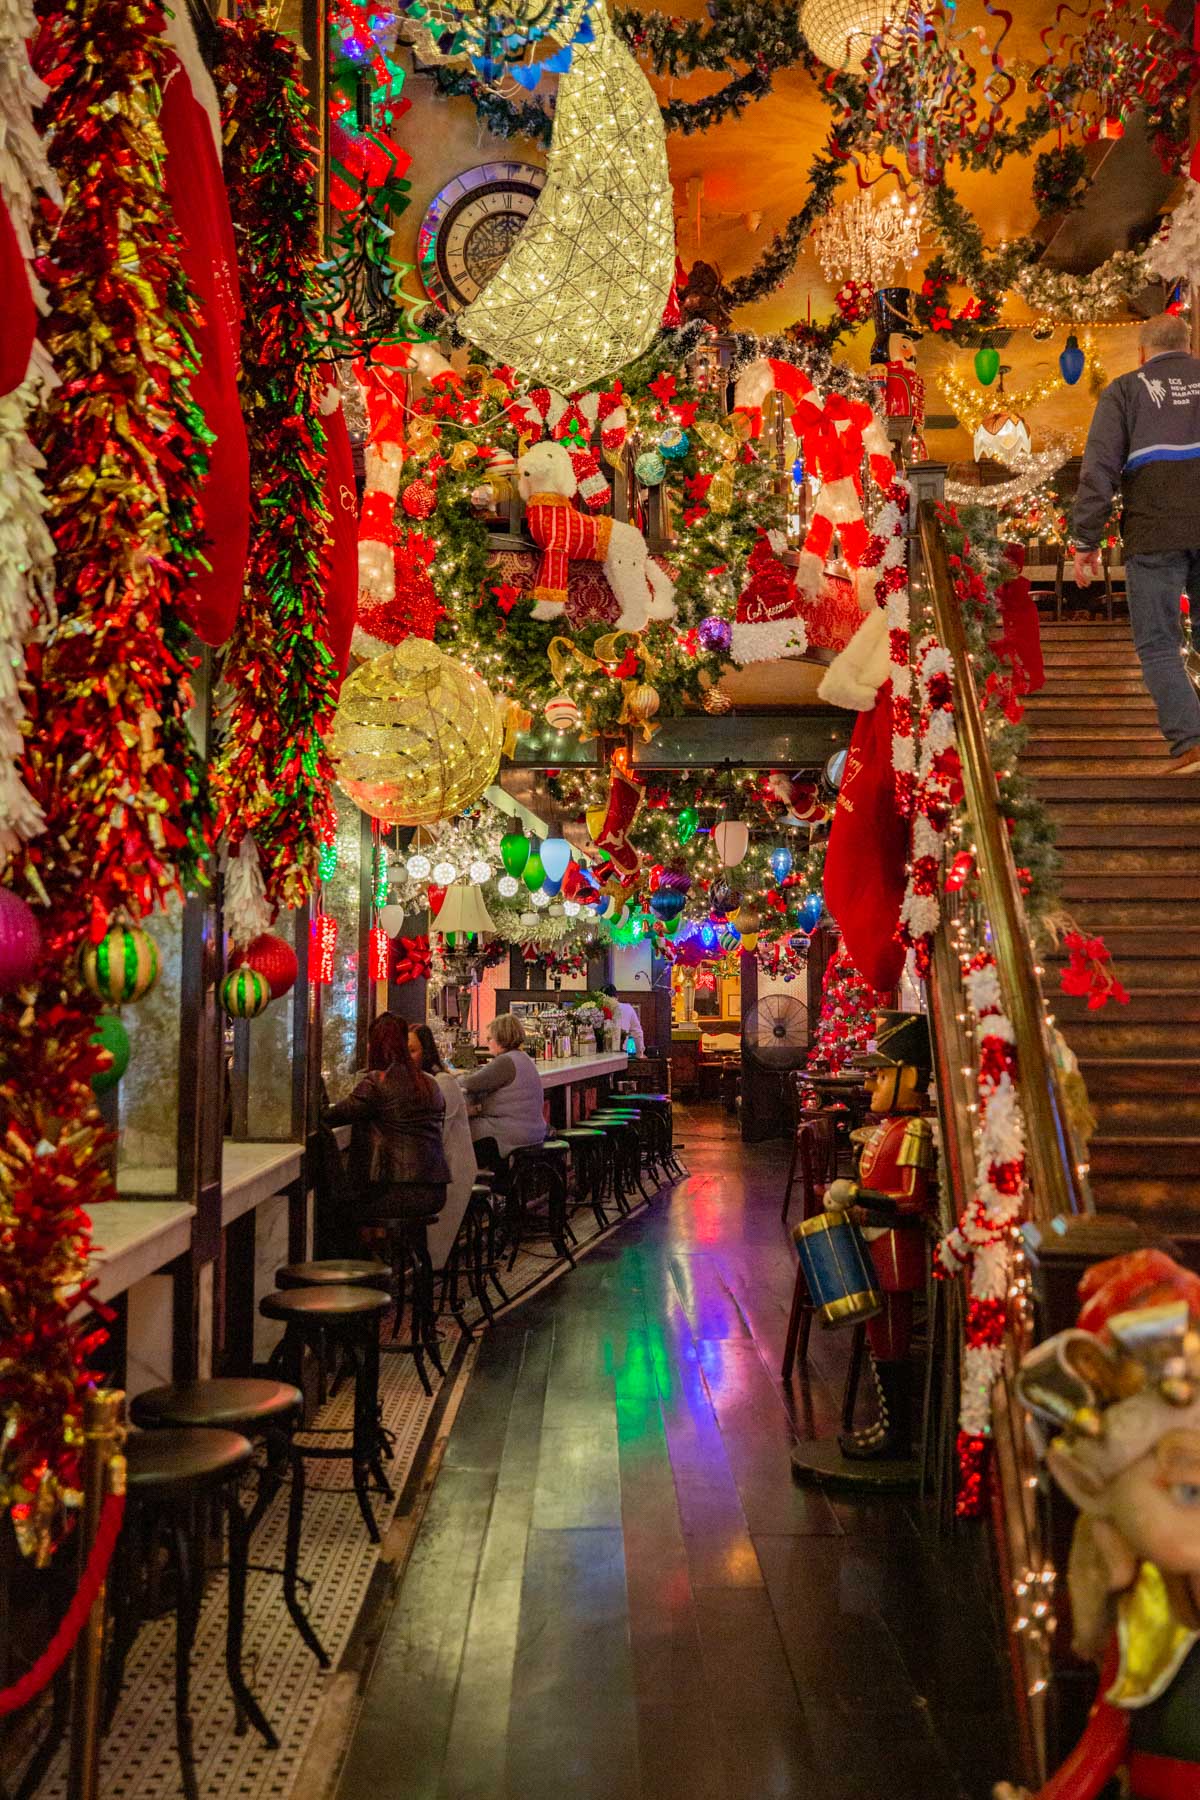 Papillon Bistro decorations
Christmas Restaurants in NYC